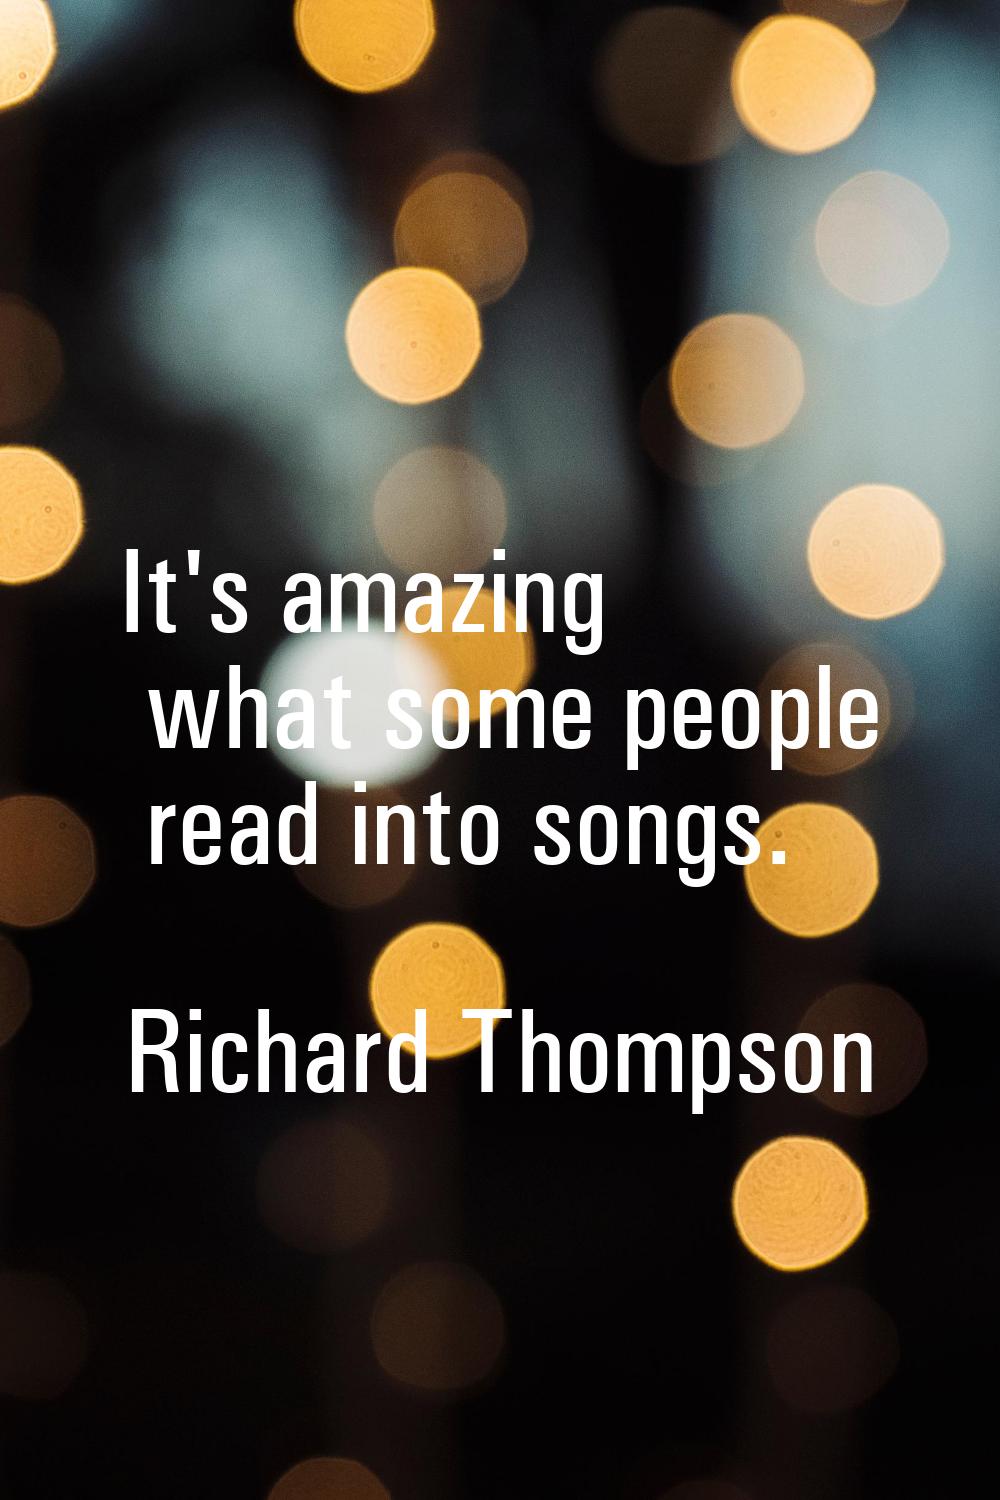 It's amazing what some people read into songs.